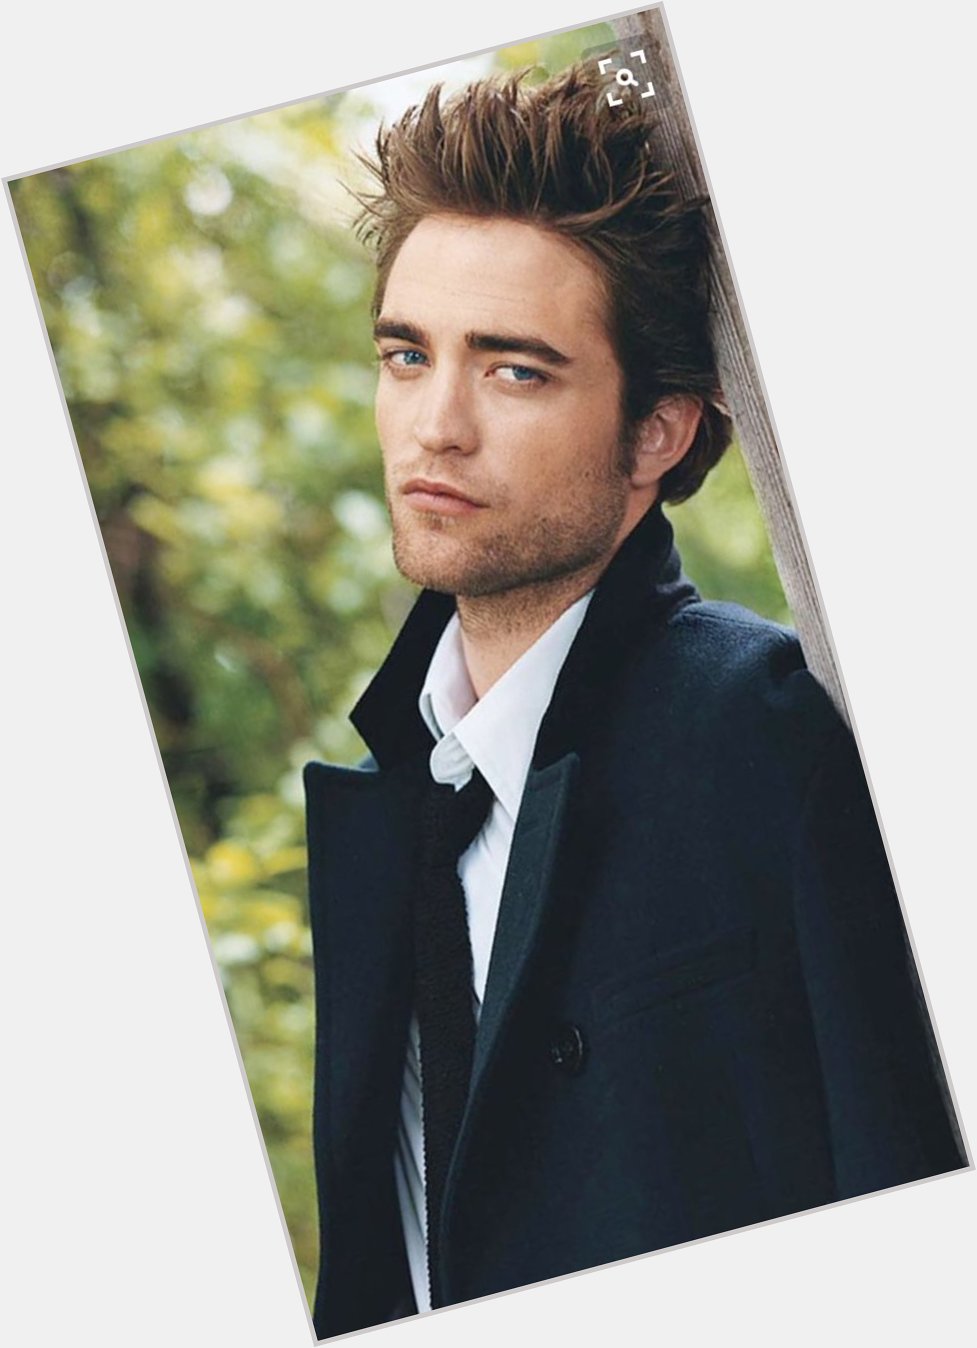 Haven\t posted in a while but... Happy birthday to Robert Pattinson!!  